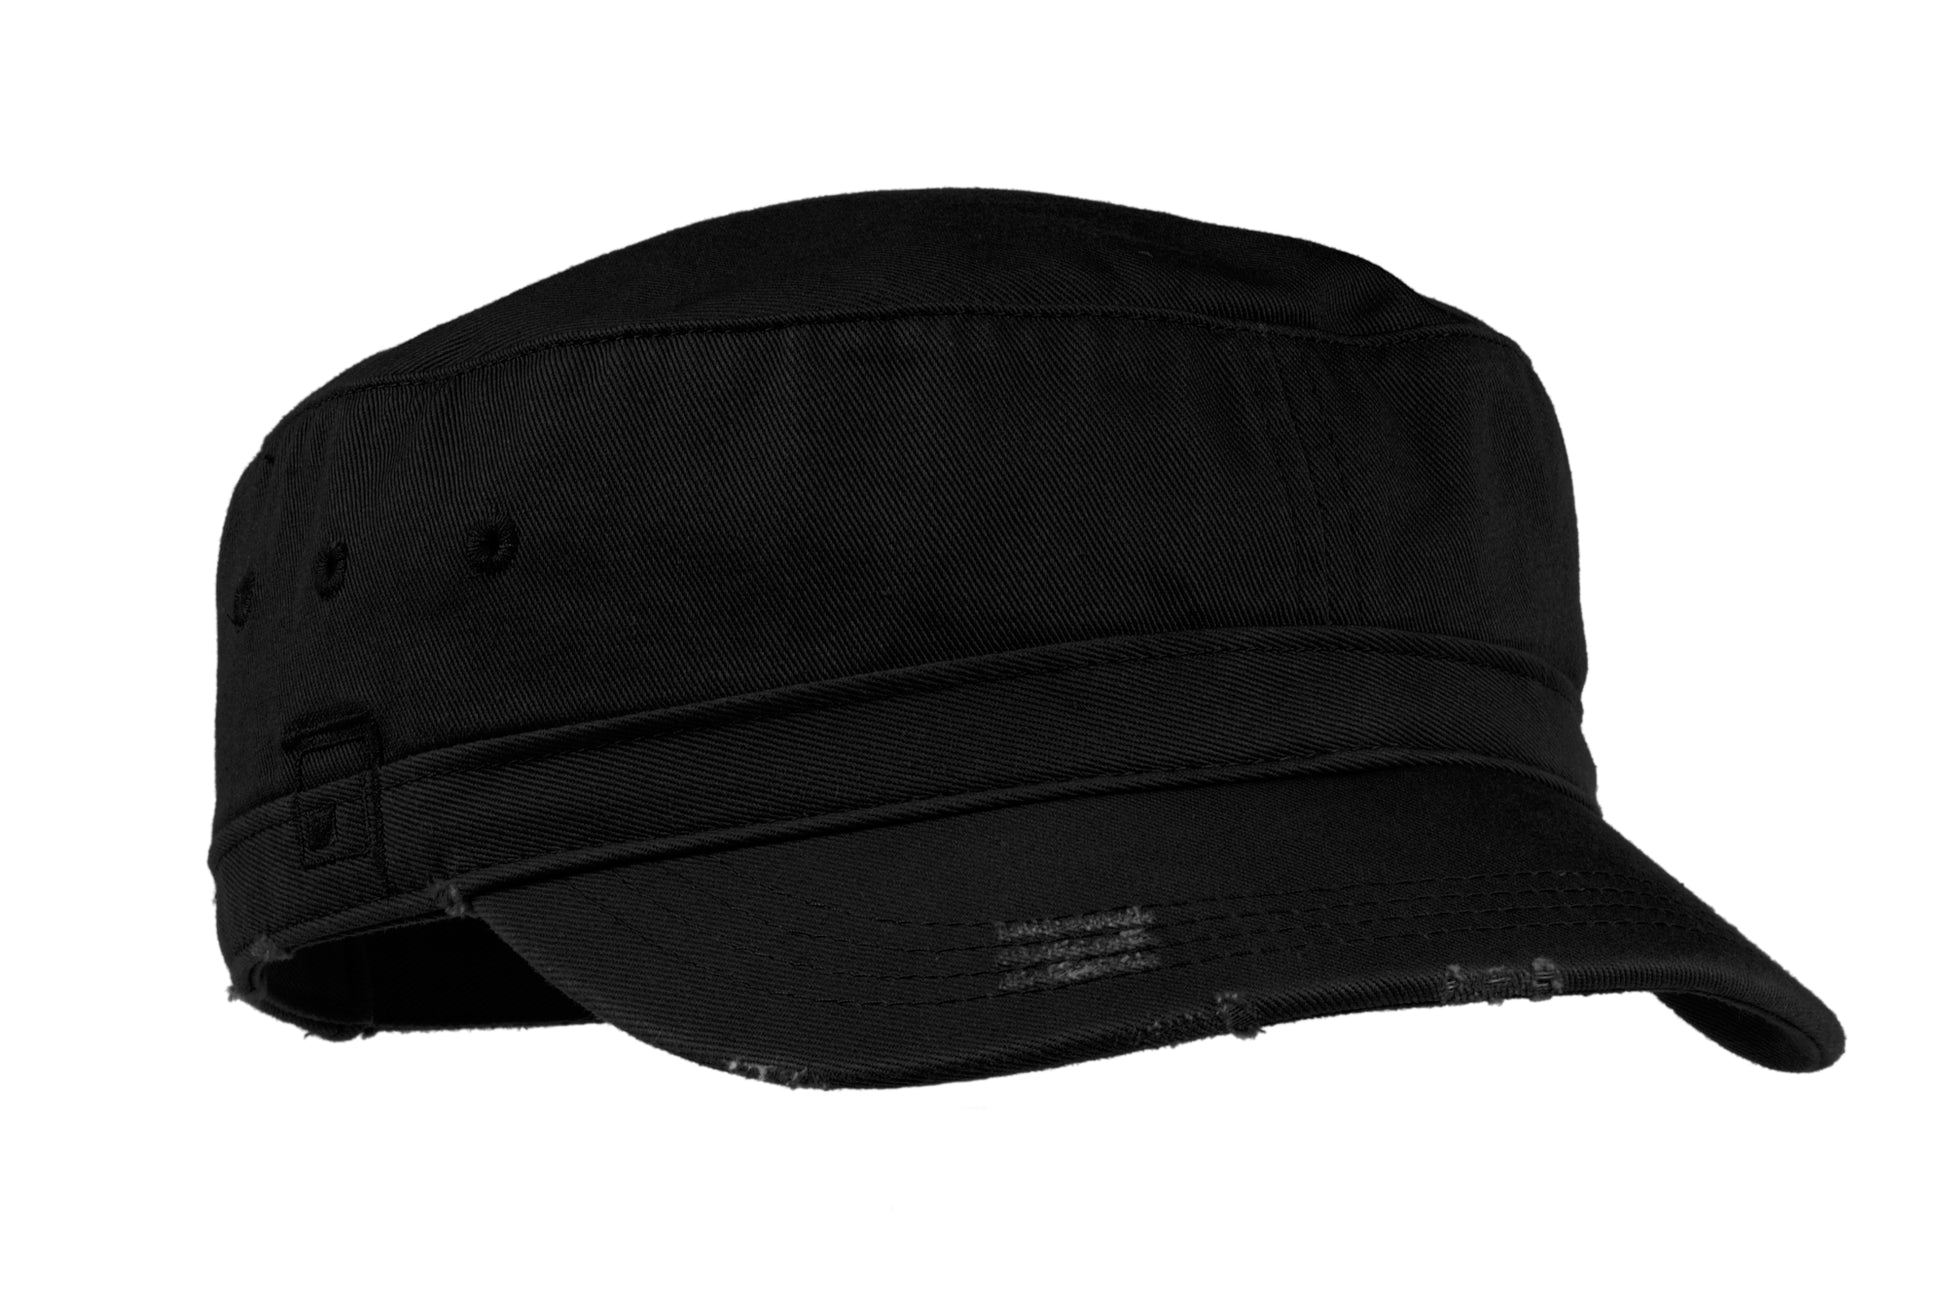 district distressed military hat black